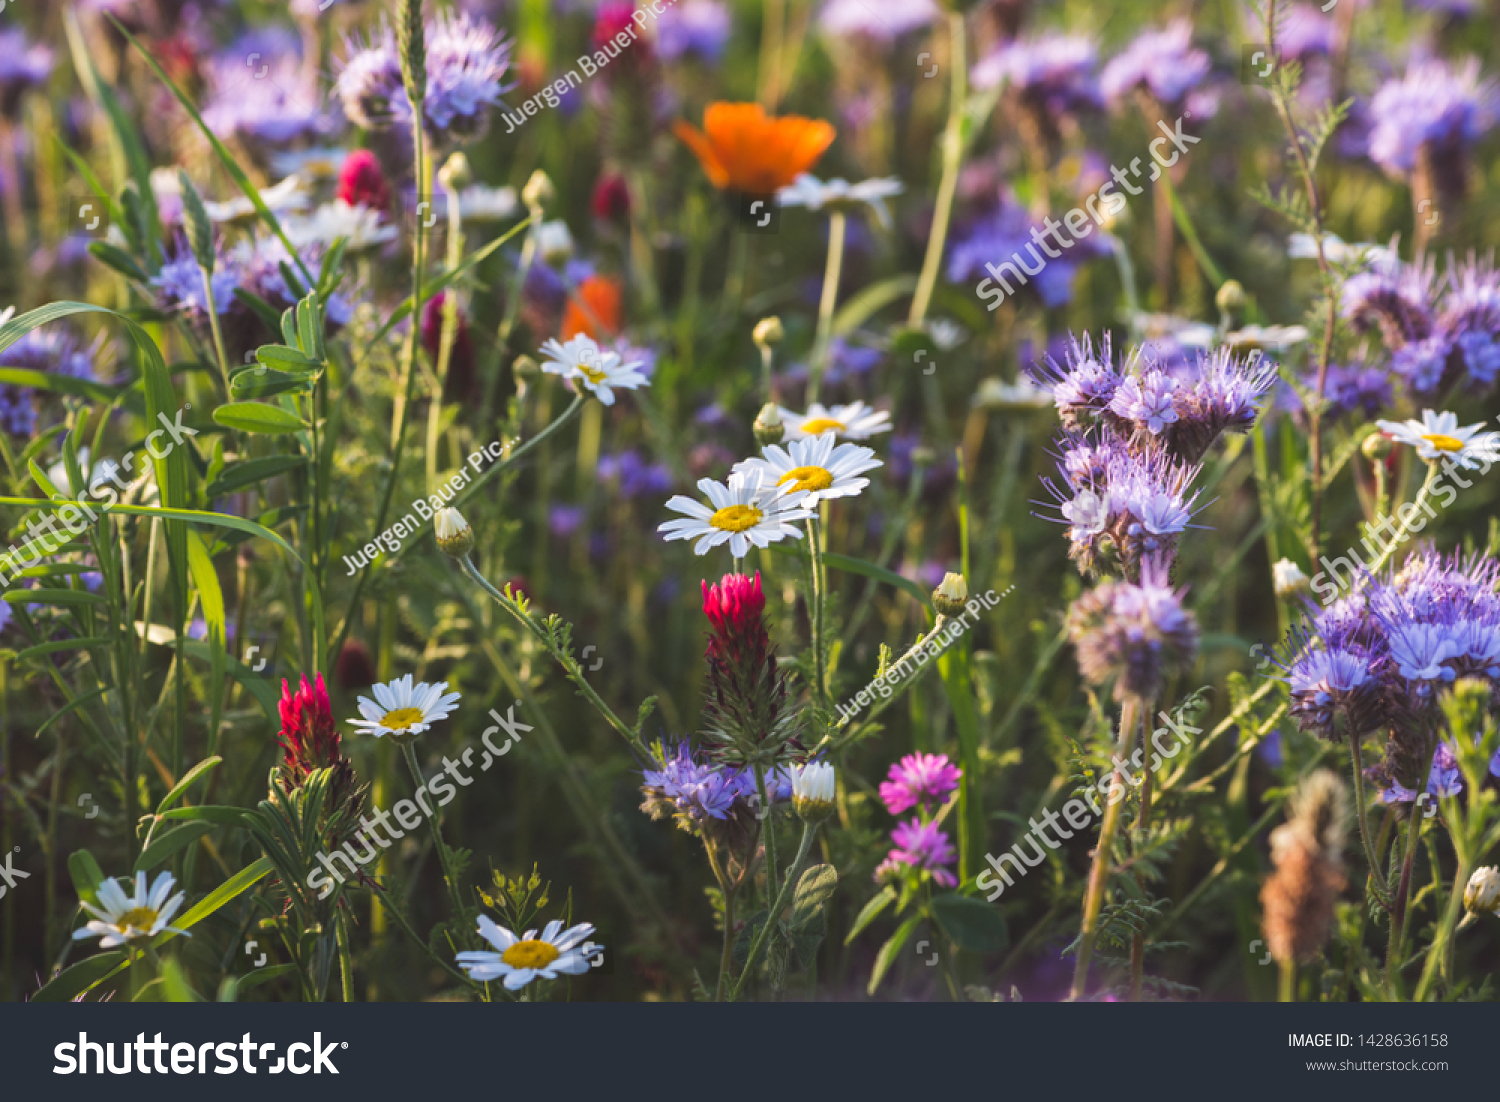 Colorful flowering herb meadow with purple blooming phacelia, orange calendula officinalis and wild chamomile. Meadow flowers photographed landscape format suitable as wall decoration in wellness area #1428636158